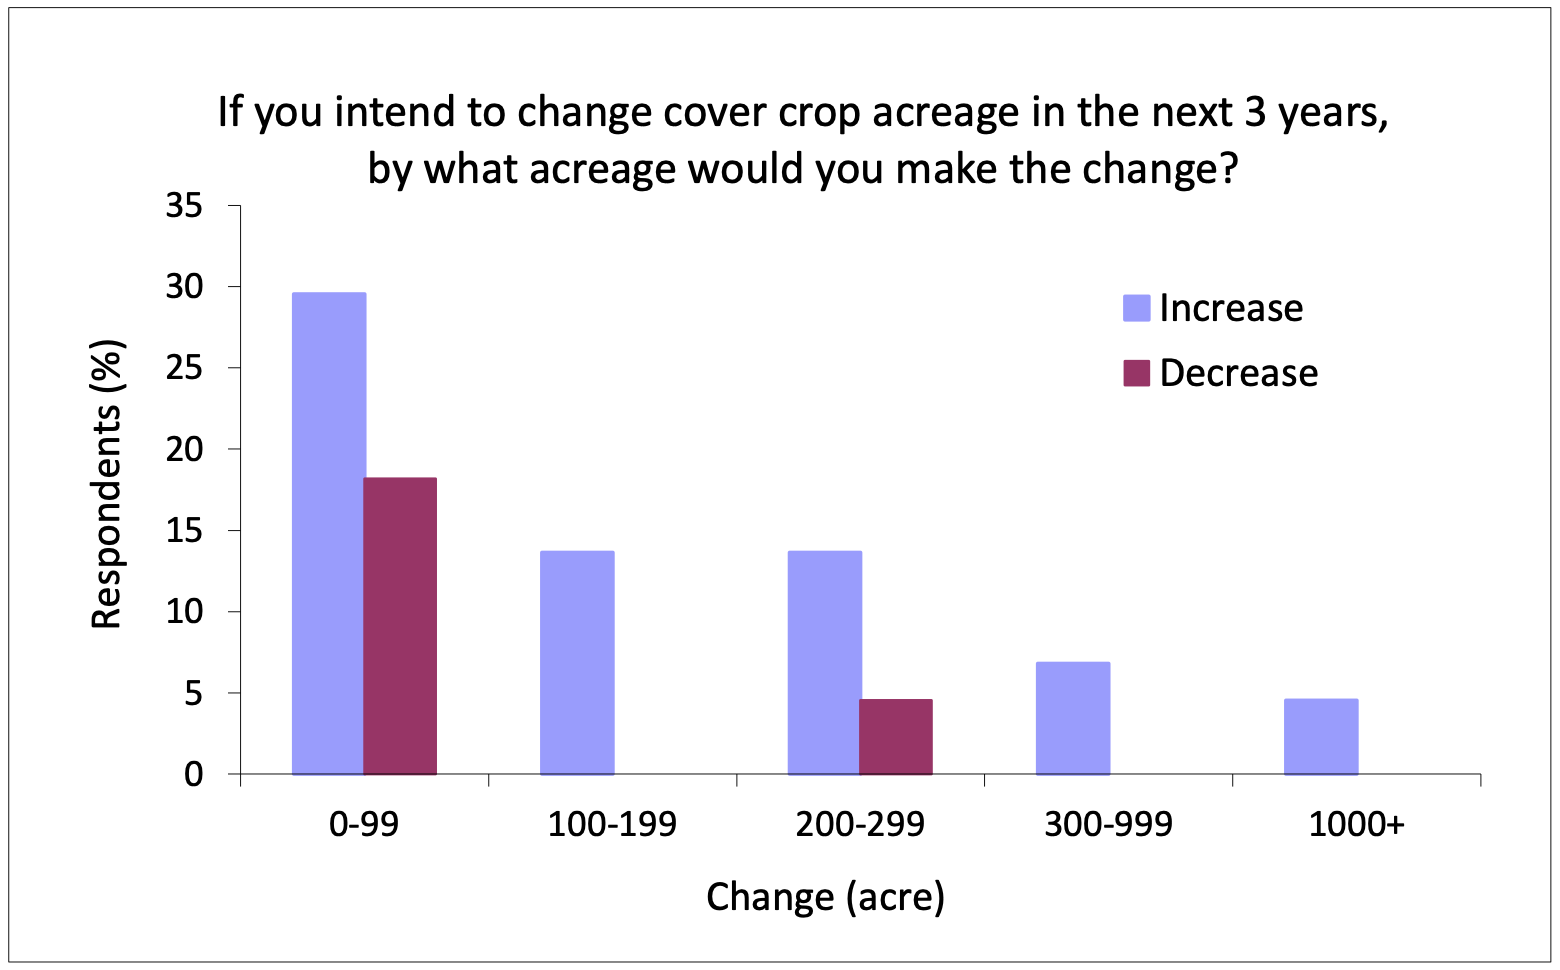 Far more cover crop growers planned to increase acreage, than decrease acreage. N=44